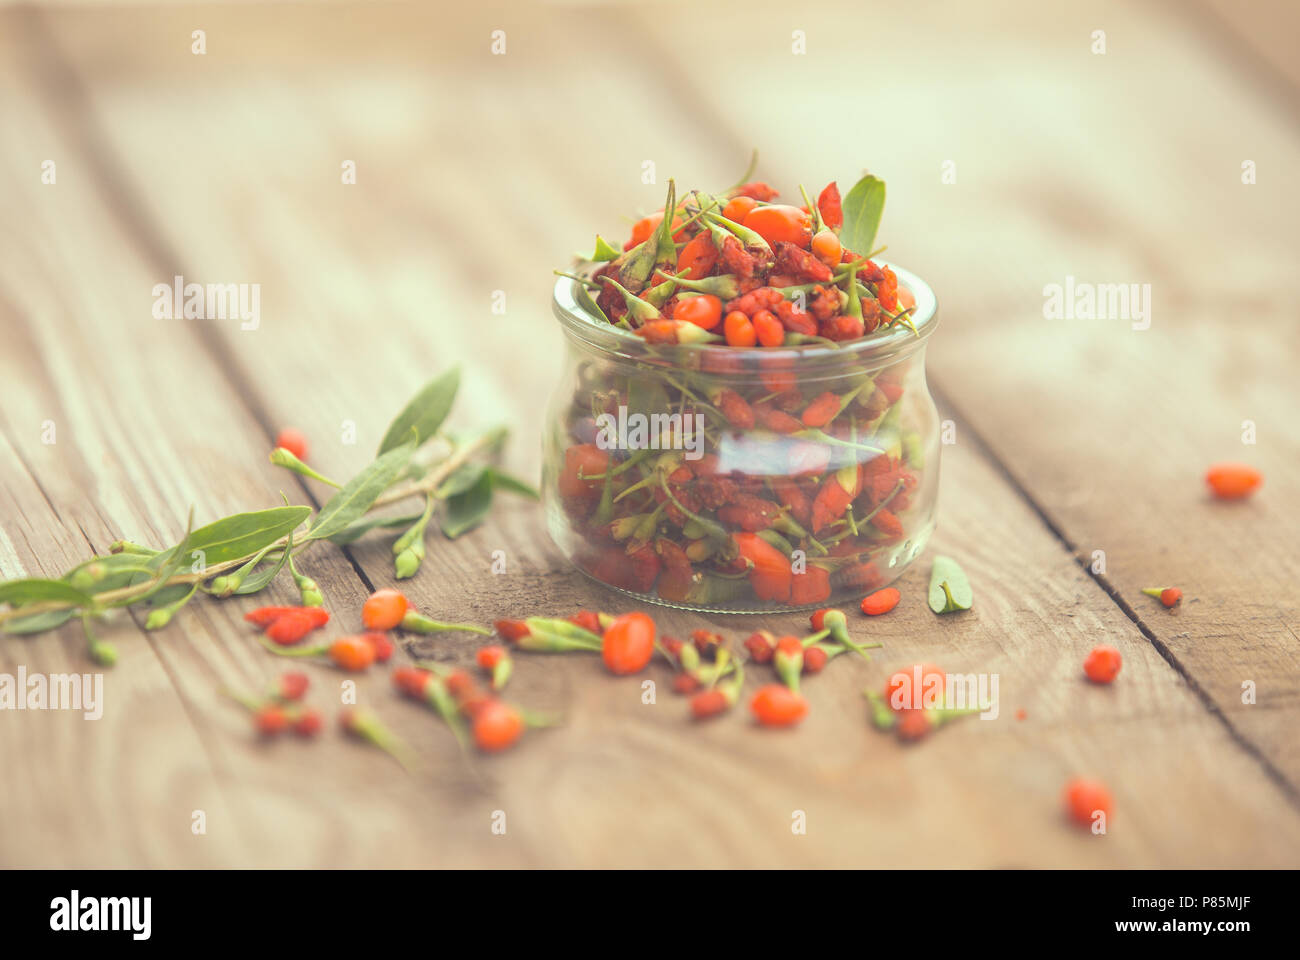 Goji berries on a wooden background Stock Photo